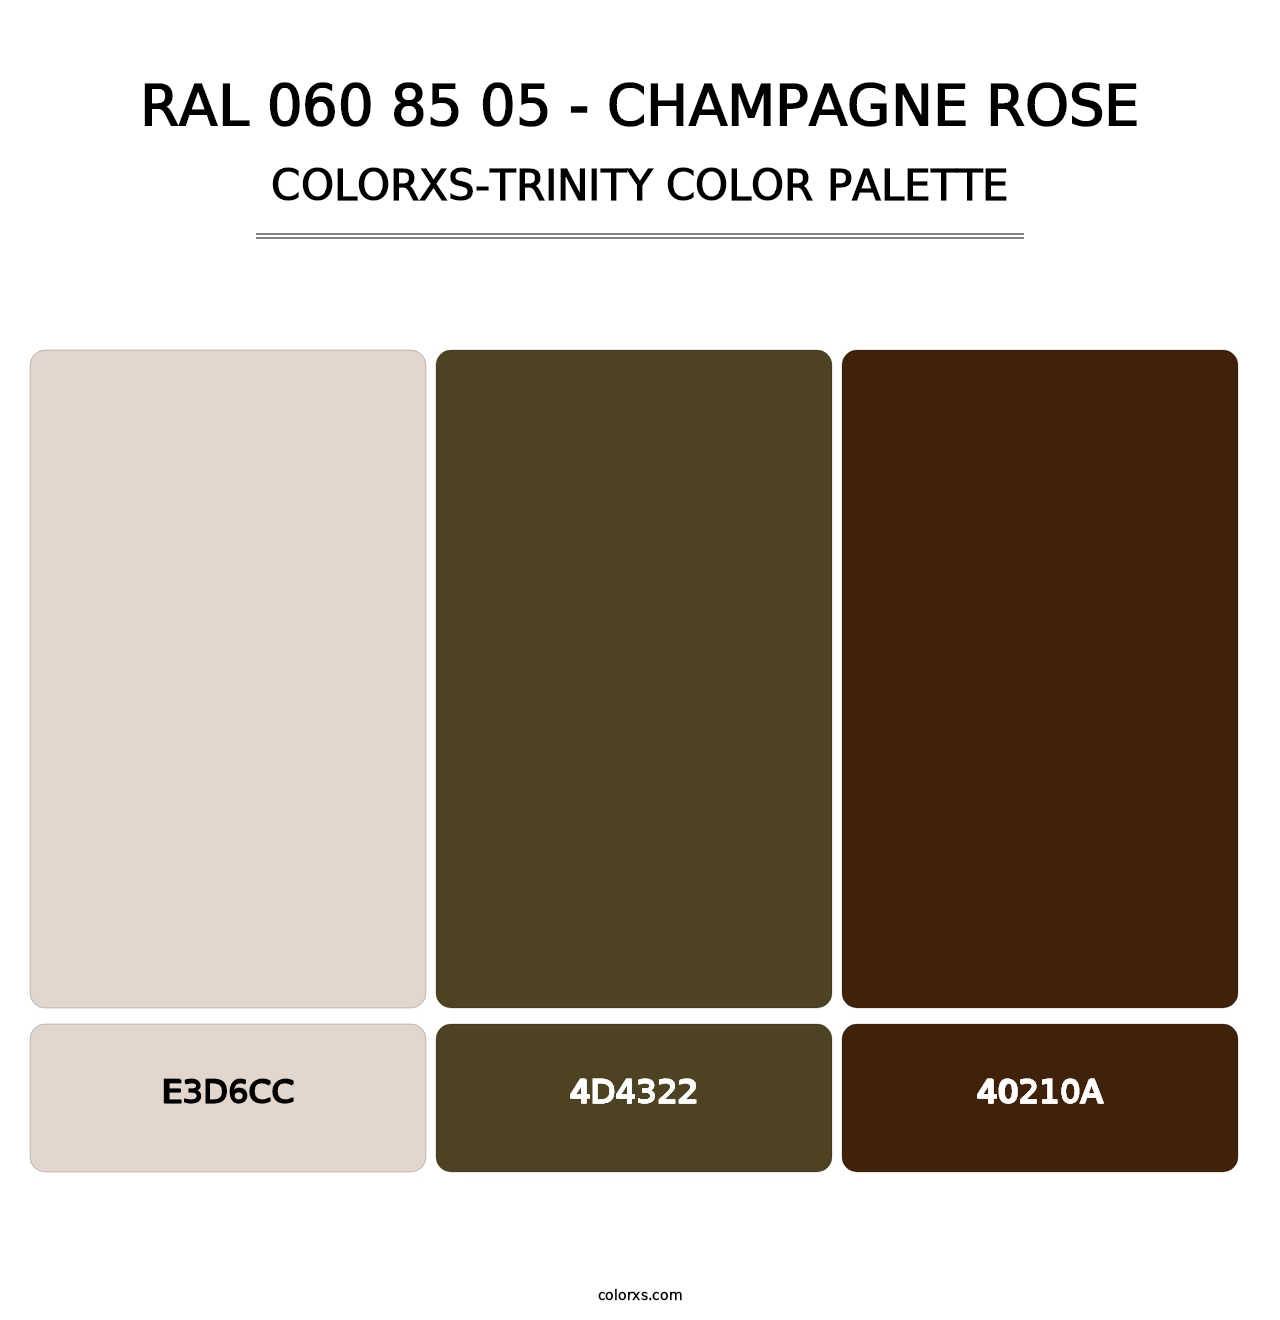 RAL 060 85 05 - Champagne Rose - Colorxs Trinity Palette